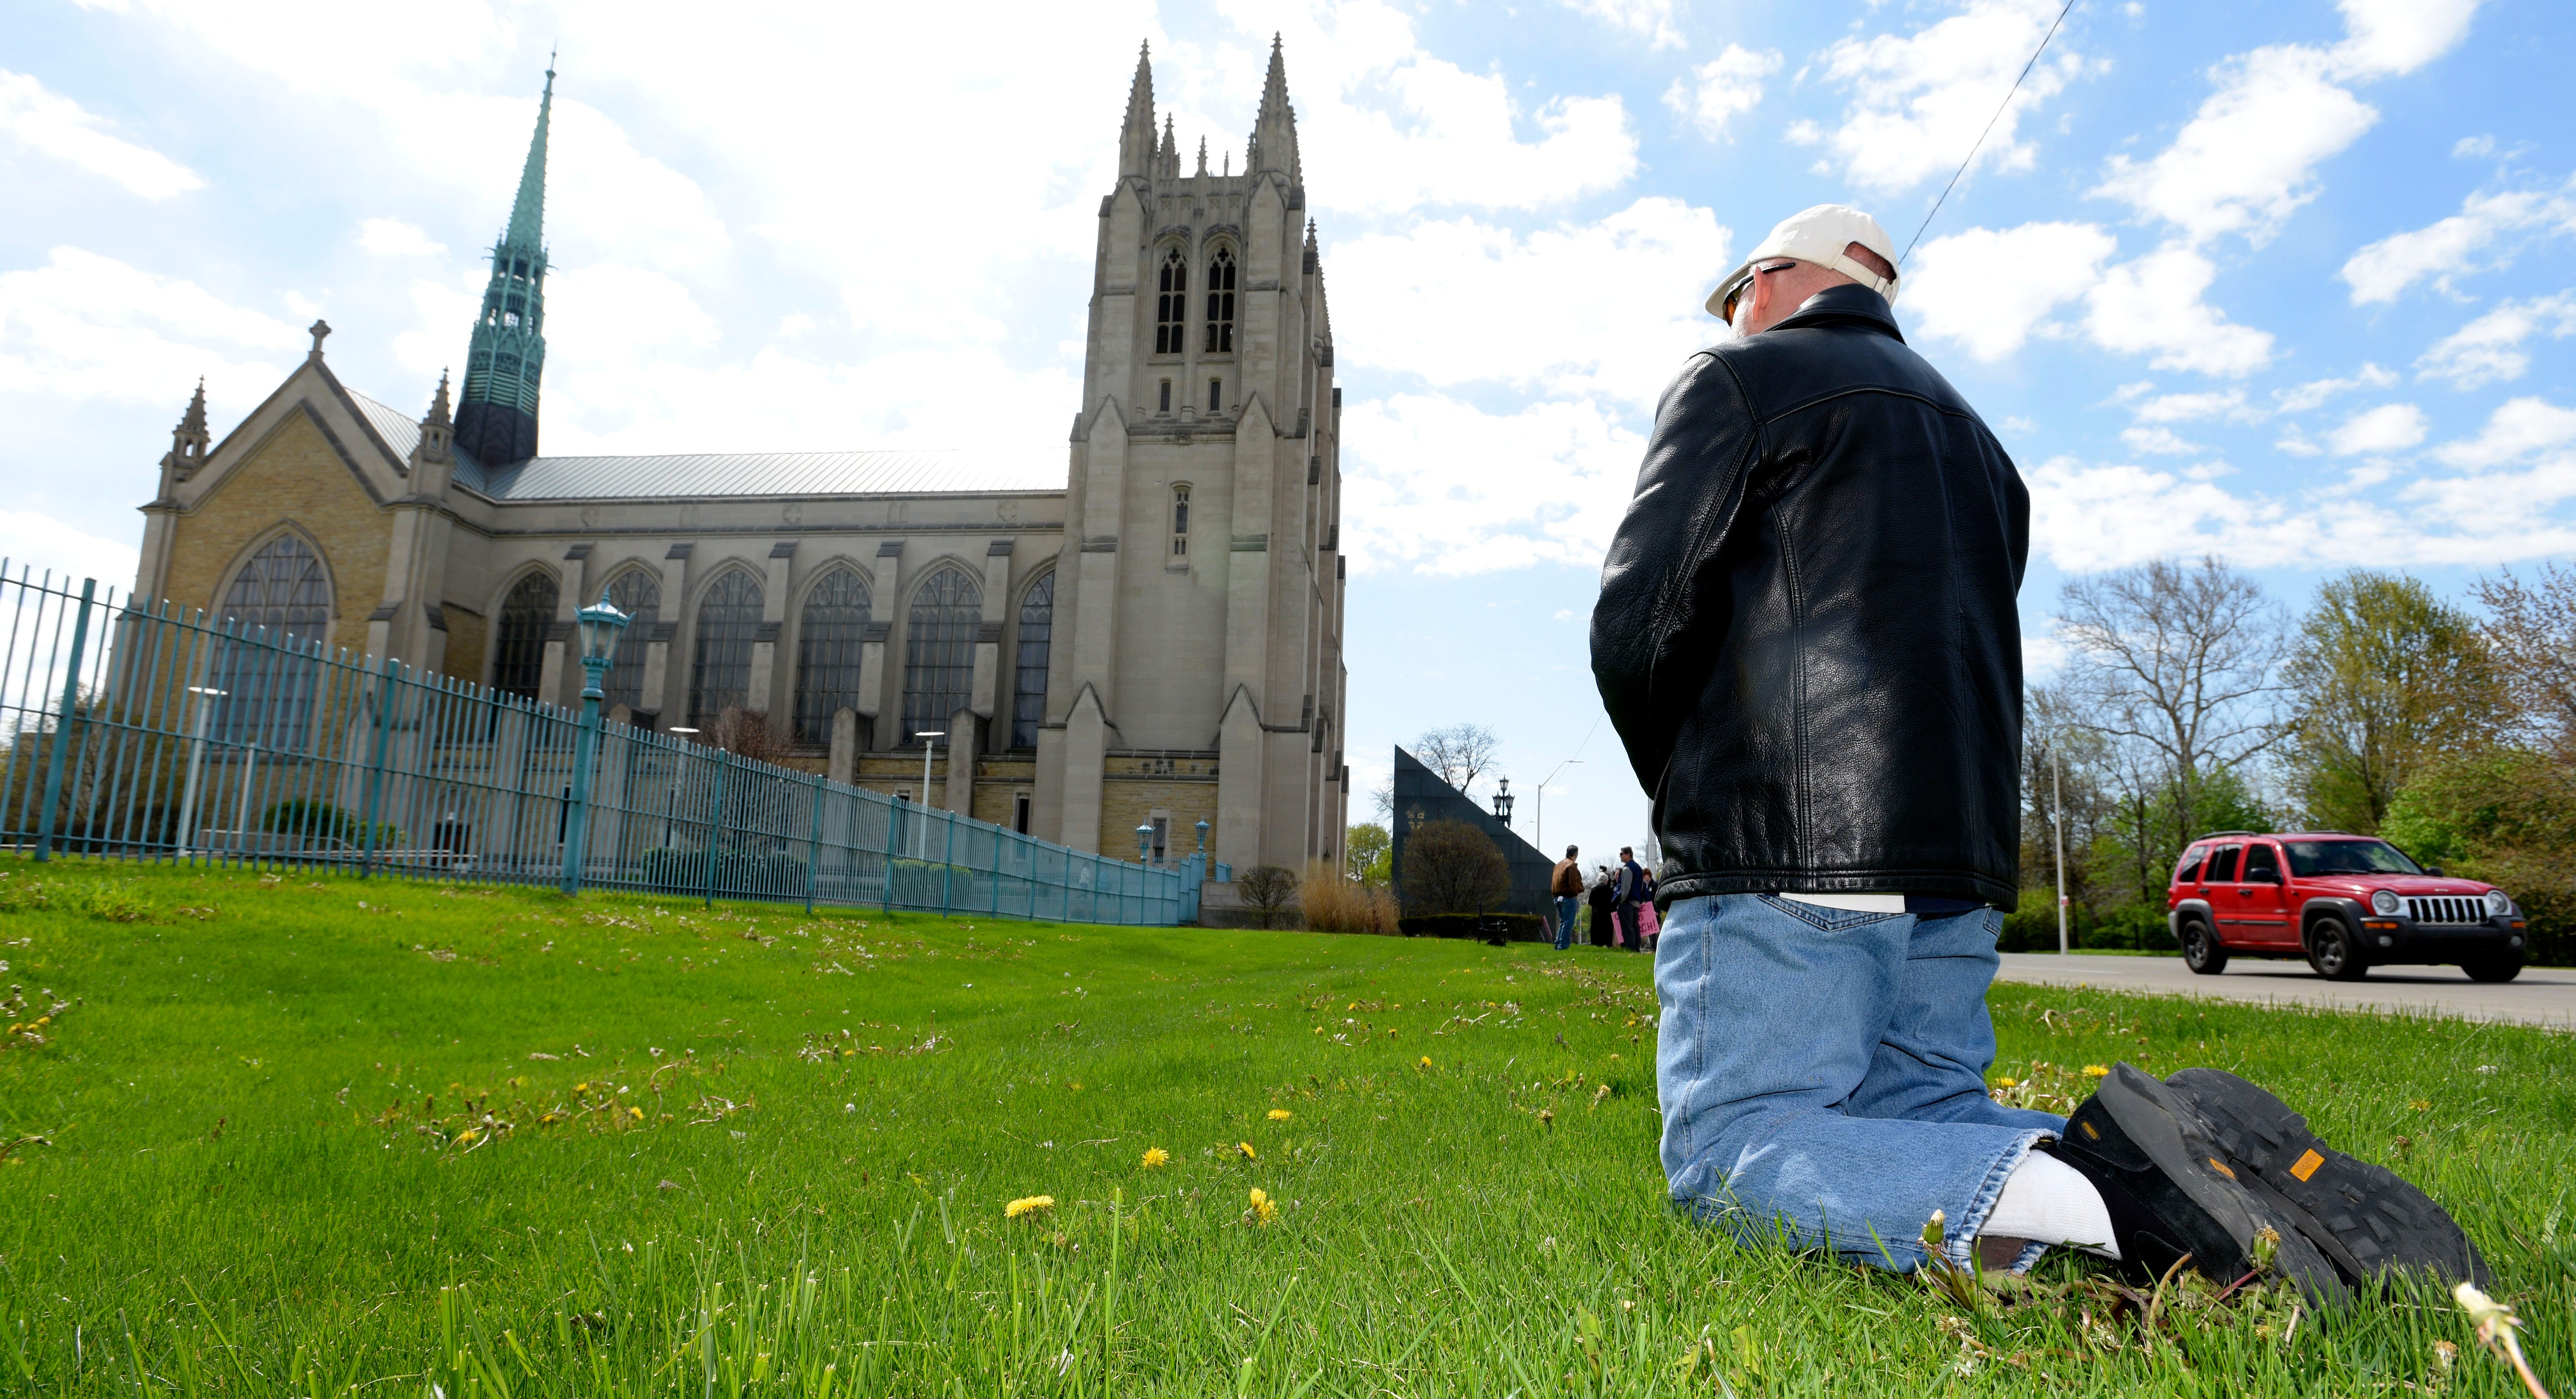 Barry Doherty, of Ortonville, kneels as he Prays the Rosary in front of the Cathedral of the Most Blessed Sacrament on Woodward Ave. in Detroit.